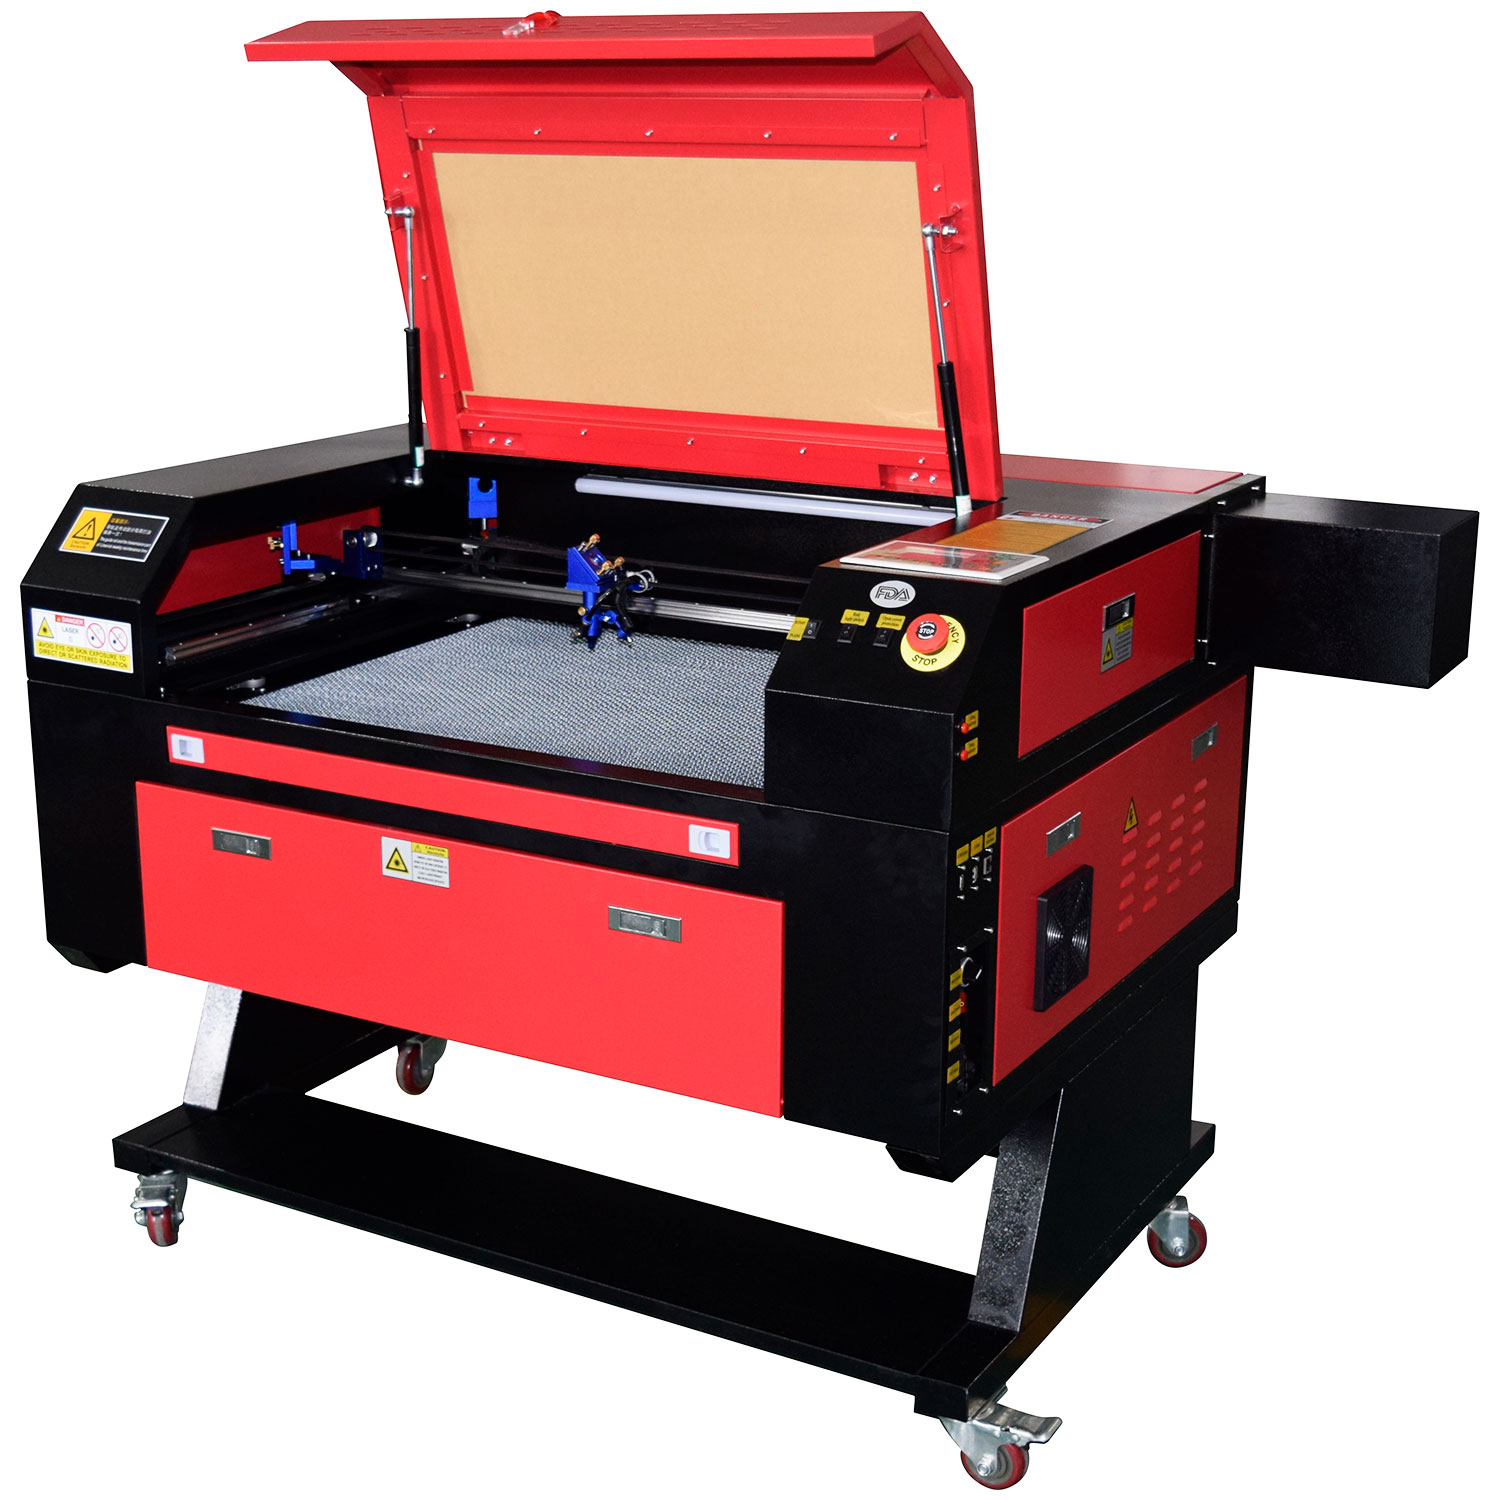 CALCA 80W 20" x 28" CO2 Laser Engraver and Cutter Machines with Ruida DSP RDWorks V8, Compatible with LightBurn Software (Local Pick-Up)